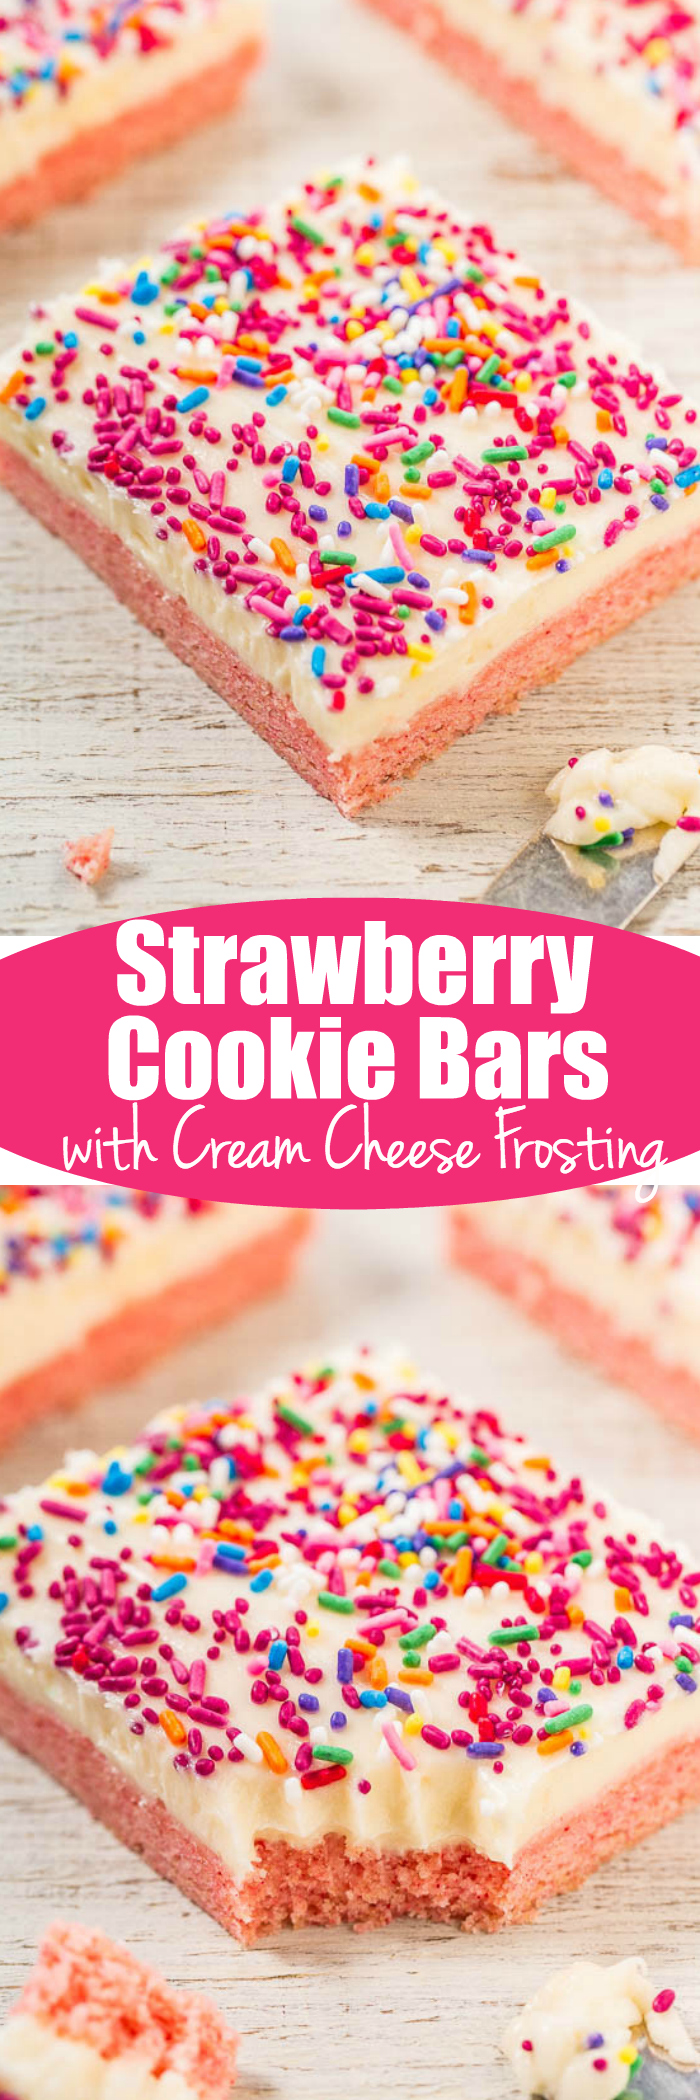 Frosted Strawberry Cake Mix Cookie Bars — Soft, chewy, and bursting with strawberry flavor!! The frosting and sprinkles make these easy, goof-proof bars taste even better! Perfect for parties and holidays!!